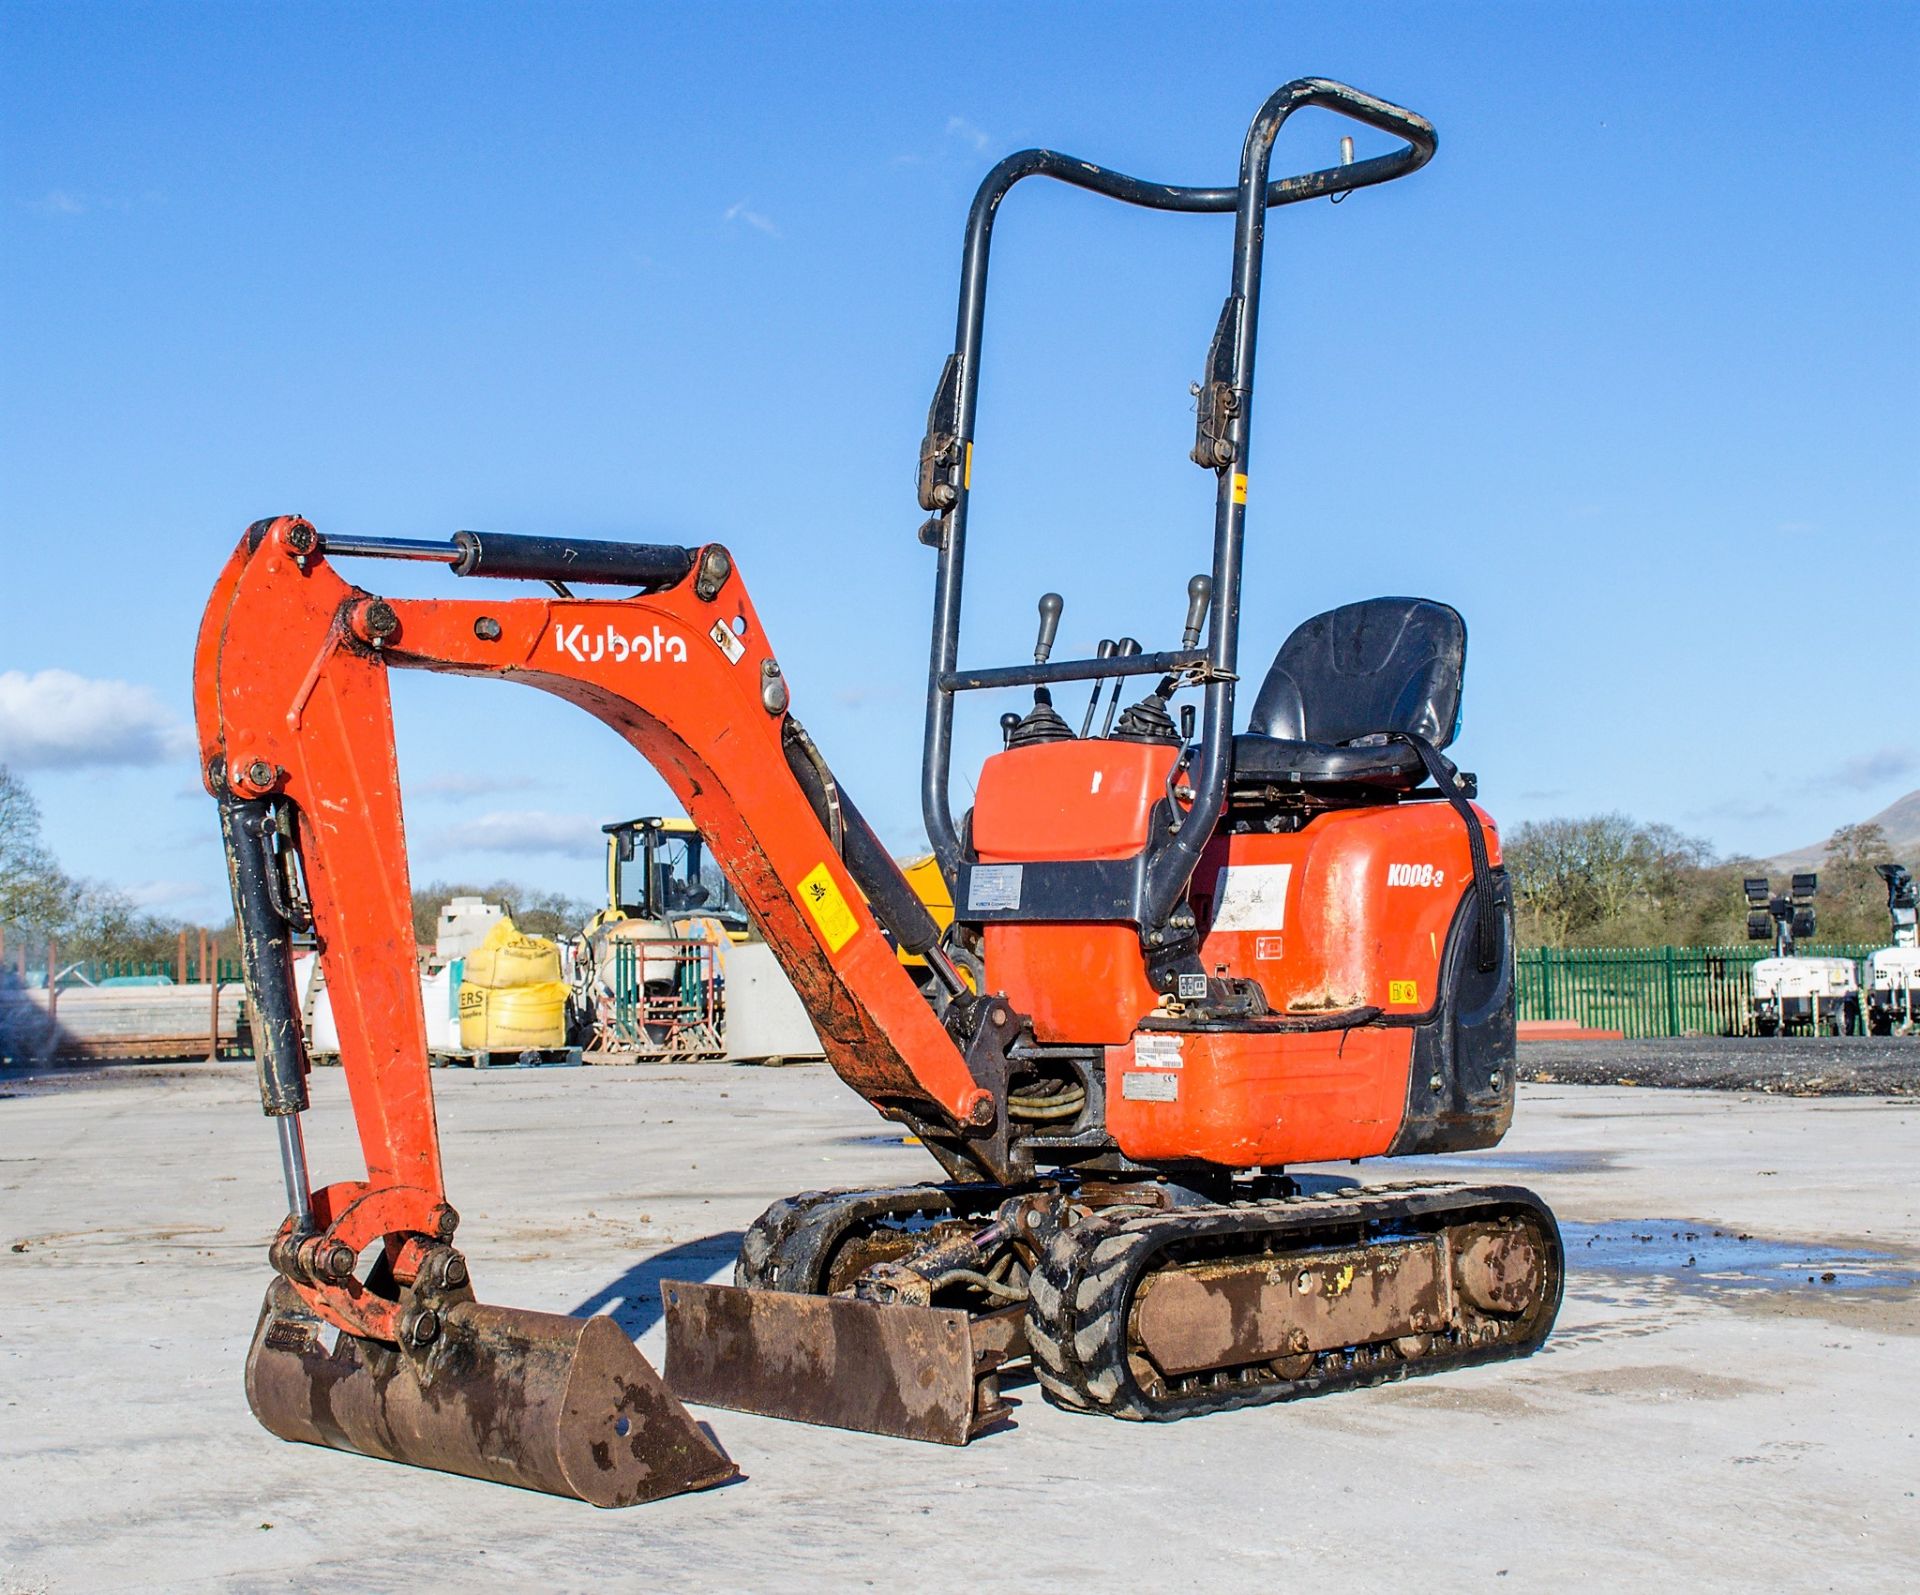 Kubota K008-3 0.8 tonne rubber tracked micro excavator Year: 2017 S/N: 29349 Recorded Hours: 682